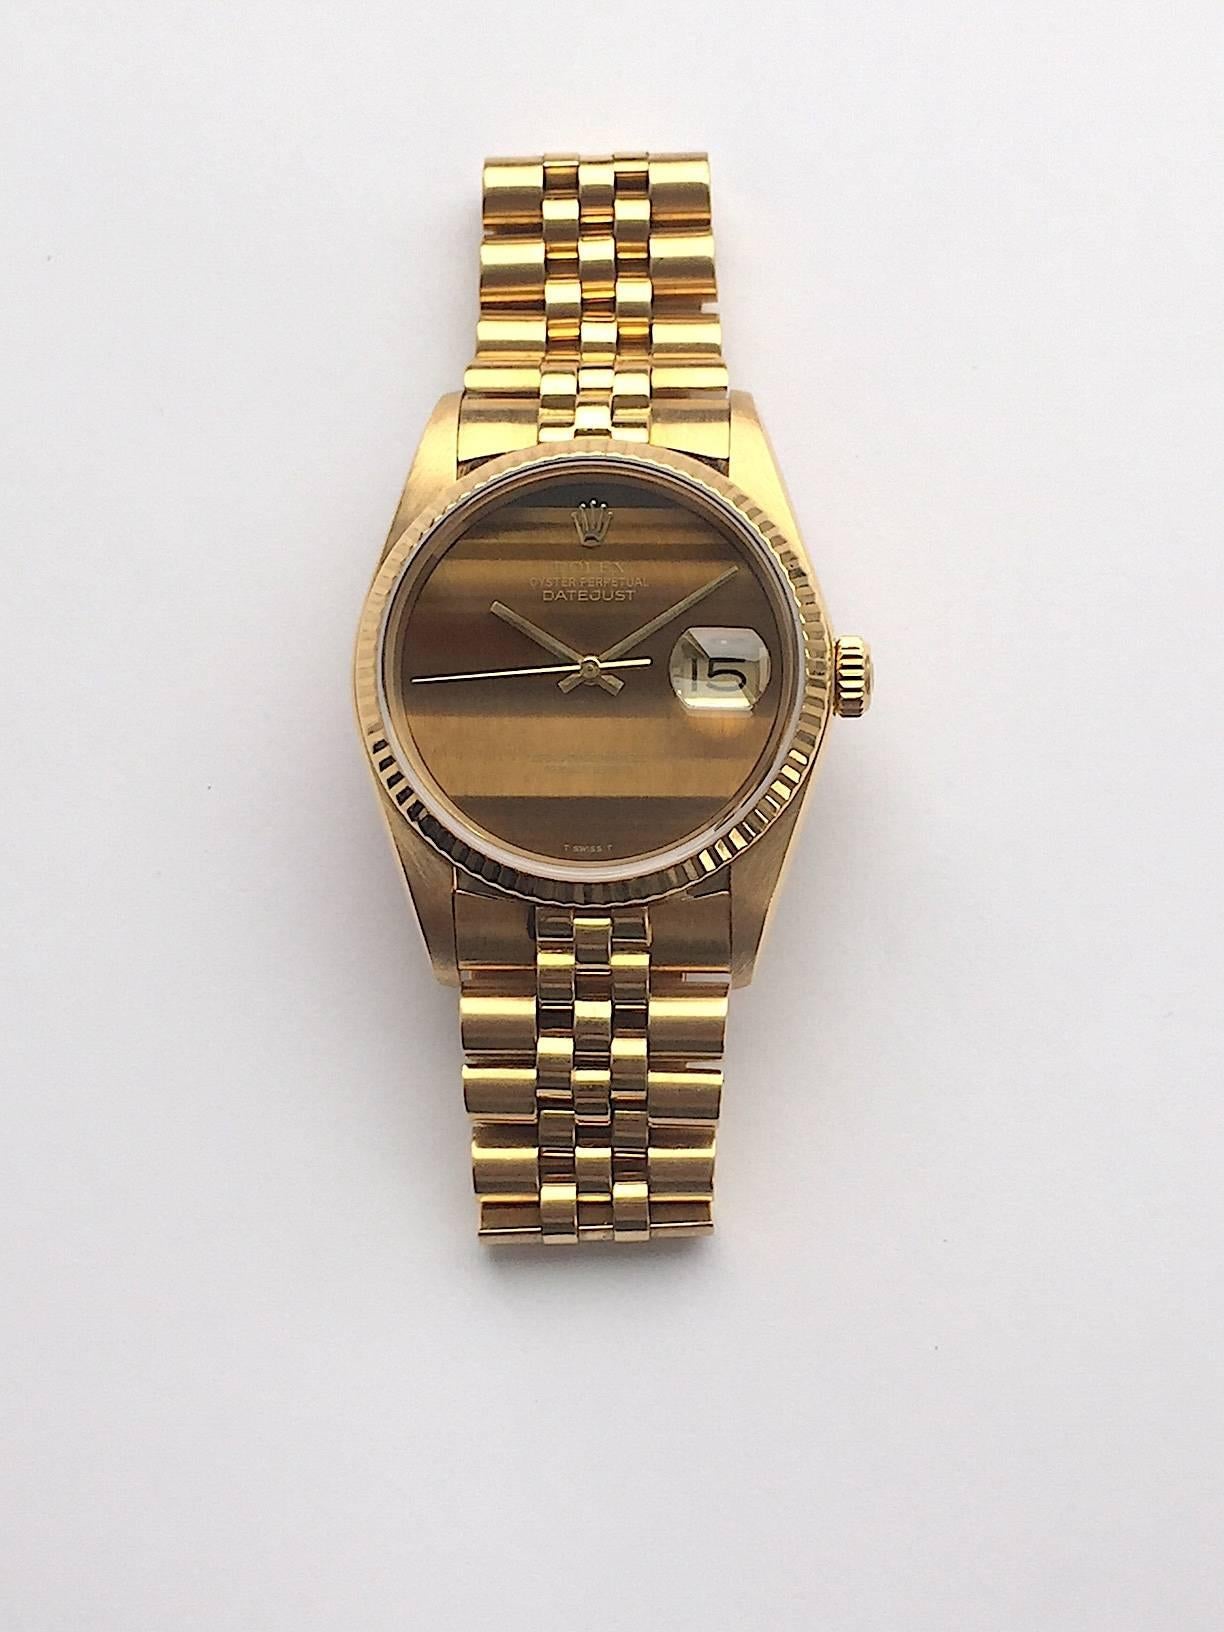 Rolex 18K Yellow Gold Oyster Perpetual Datejust Wristwatch
Factory Rolex Tiger's Eye Quartz Hard Stone Dial
Stunning Original Rolex Tiger's Eye Dial without Numerals 
Matching Hands to Dial 
18K Yellow Gold Fluted Bezel
36mm in size 
Rolex Calibre